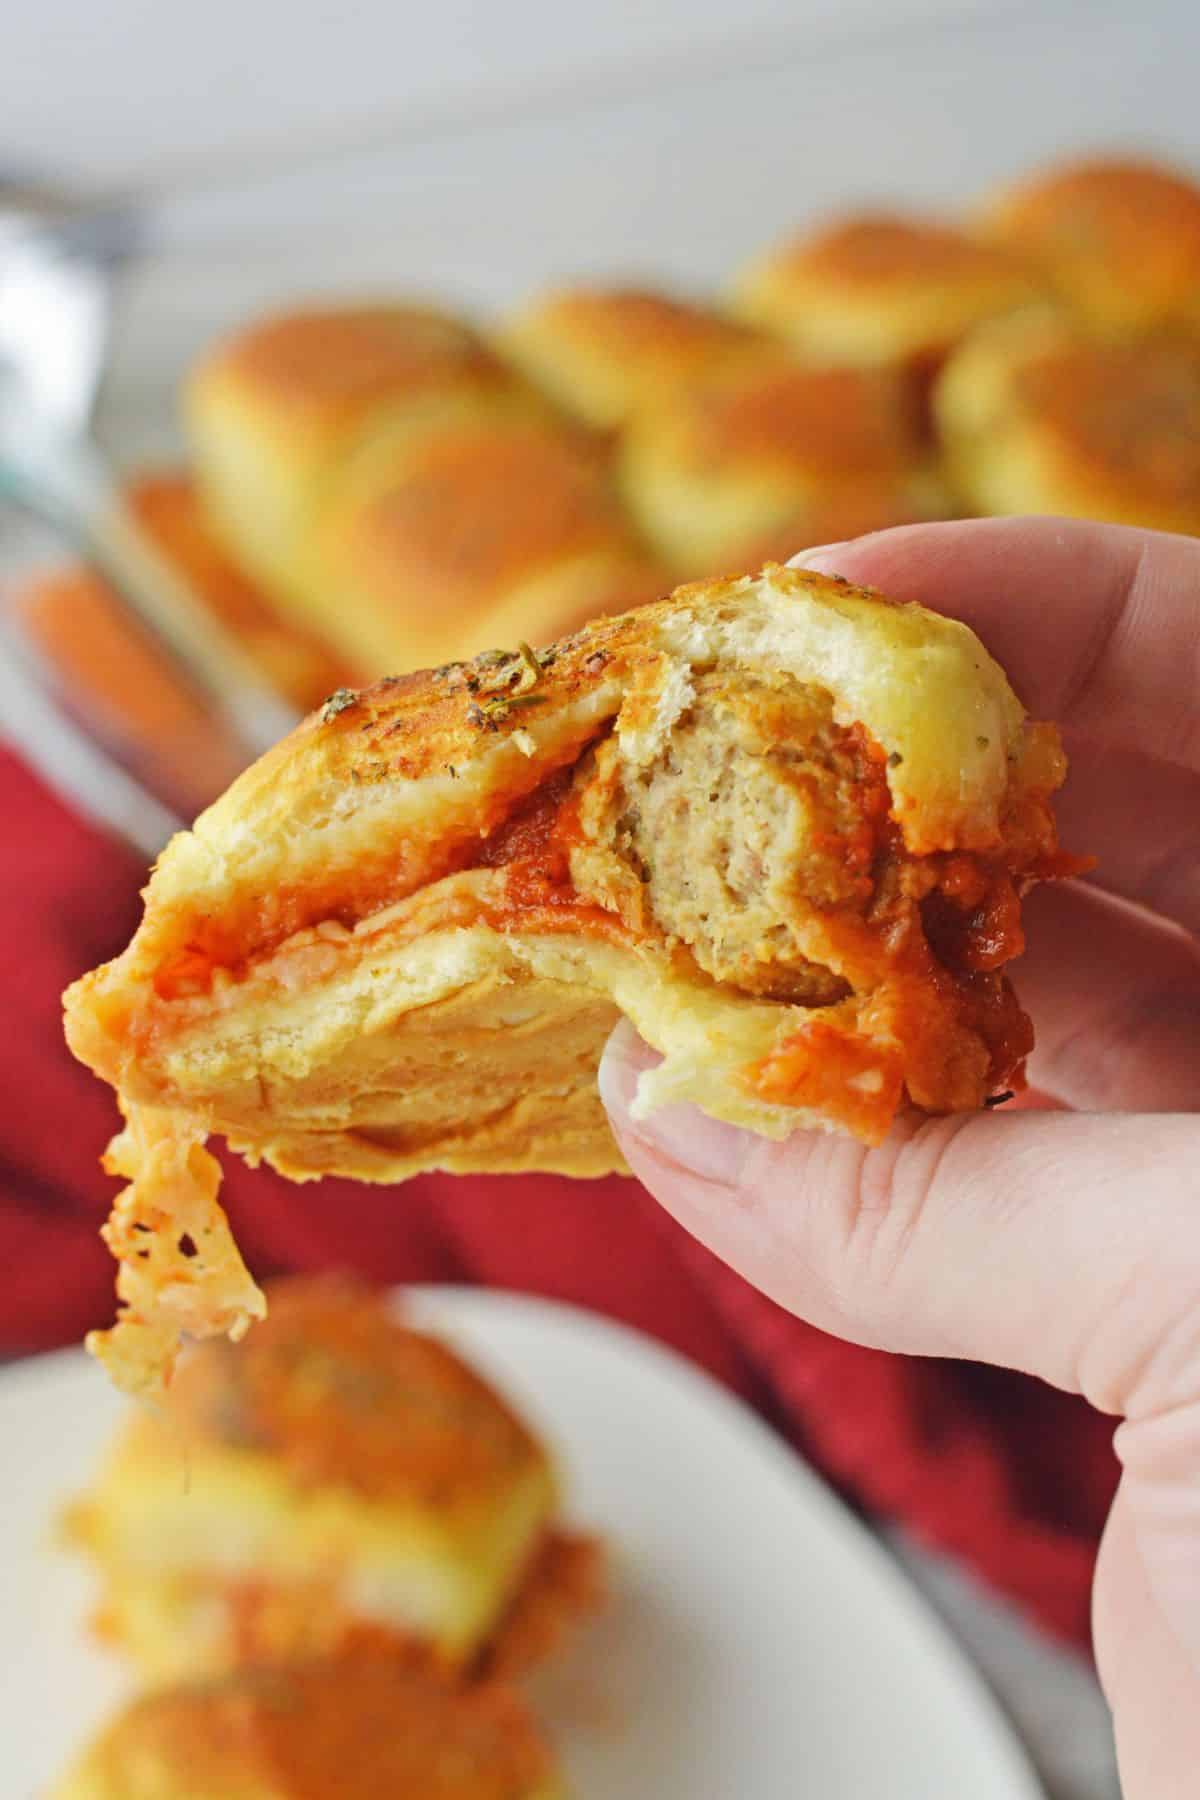 meatball inside rolls with sauce oozing out of roll